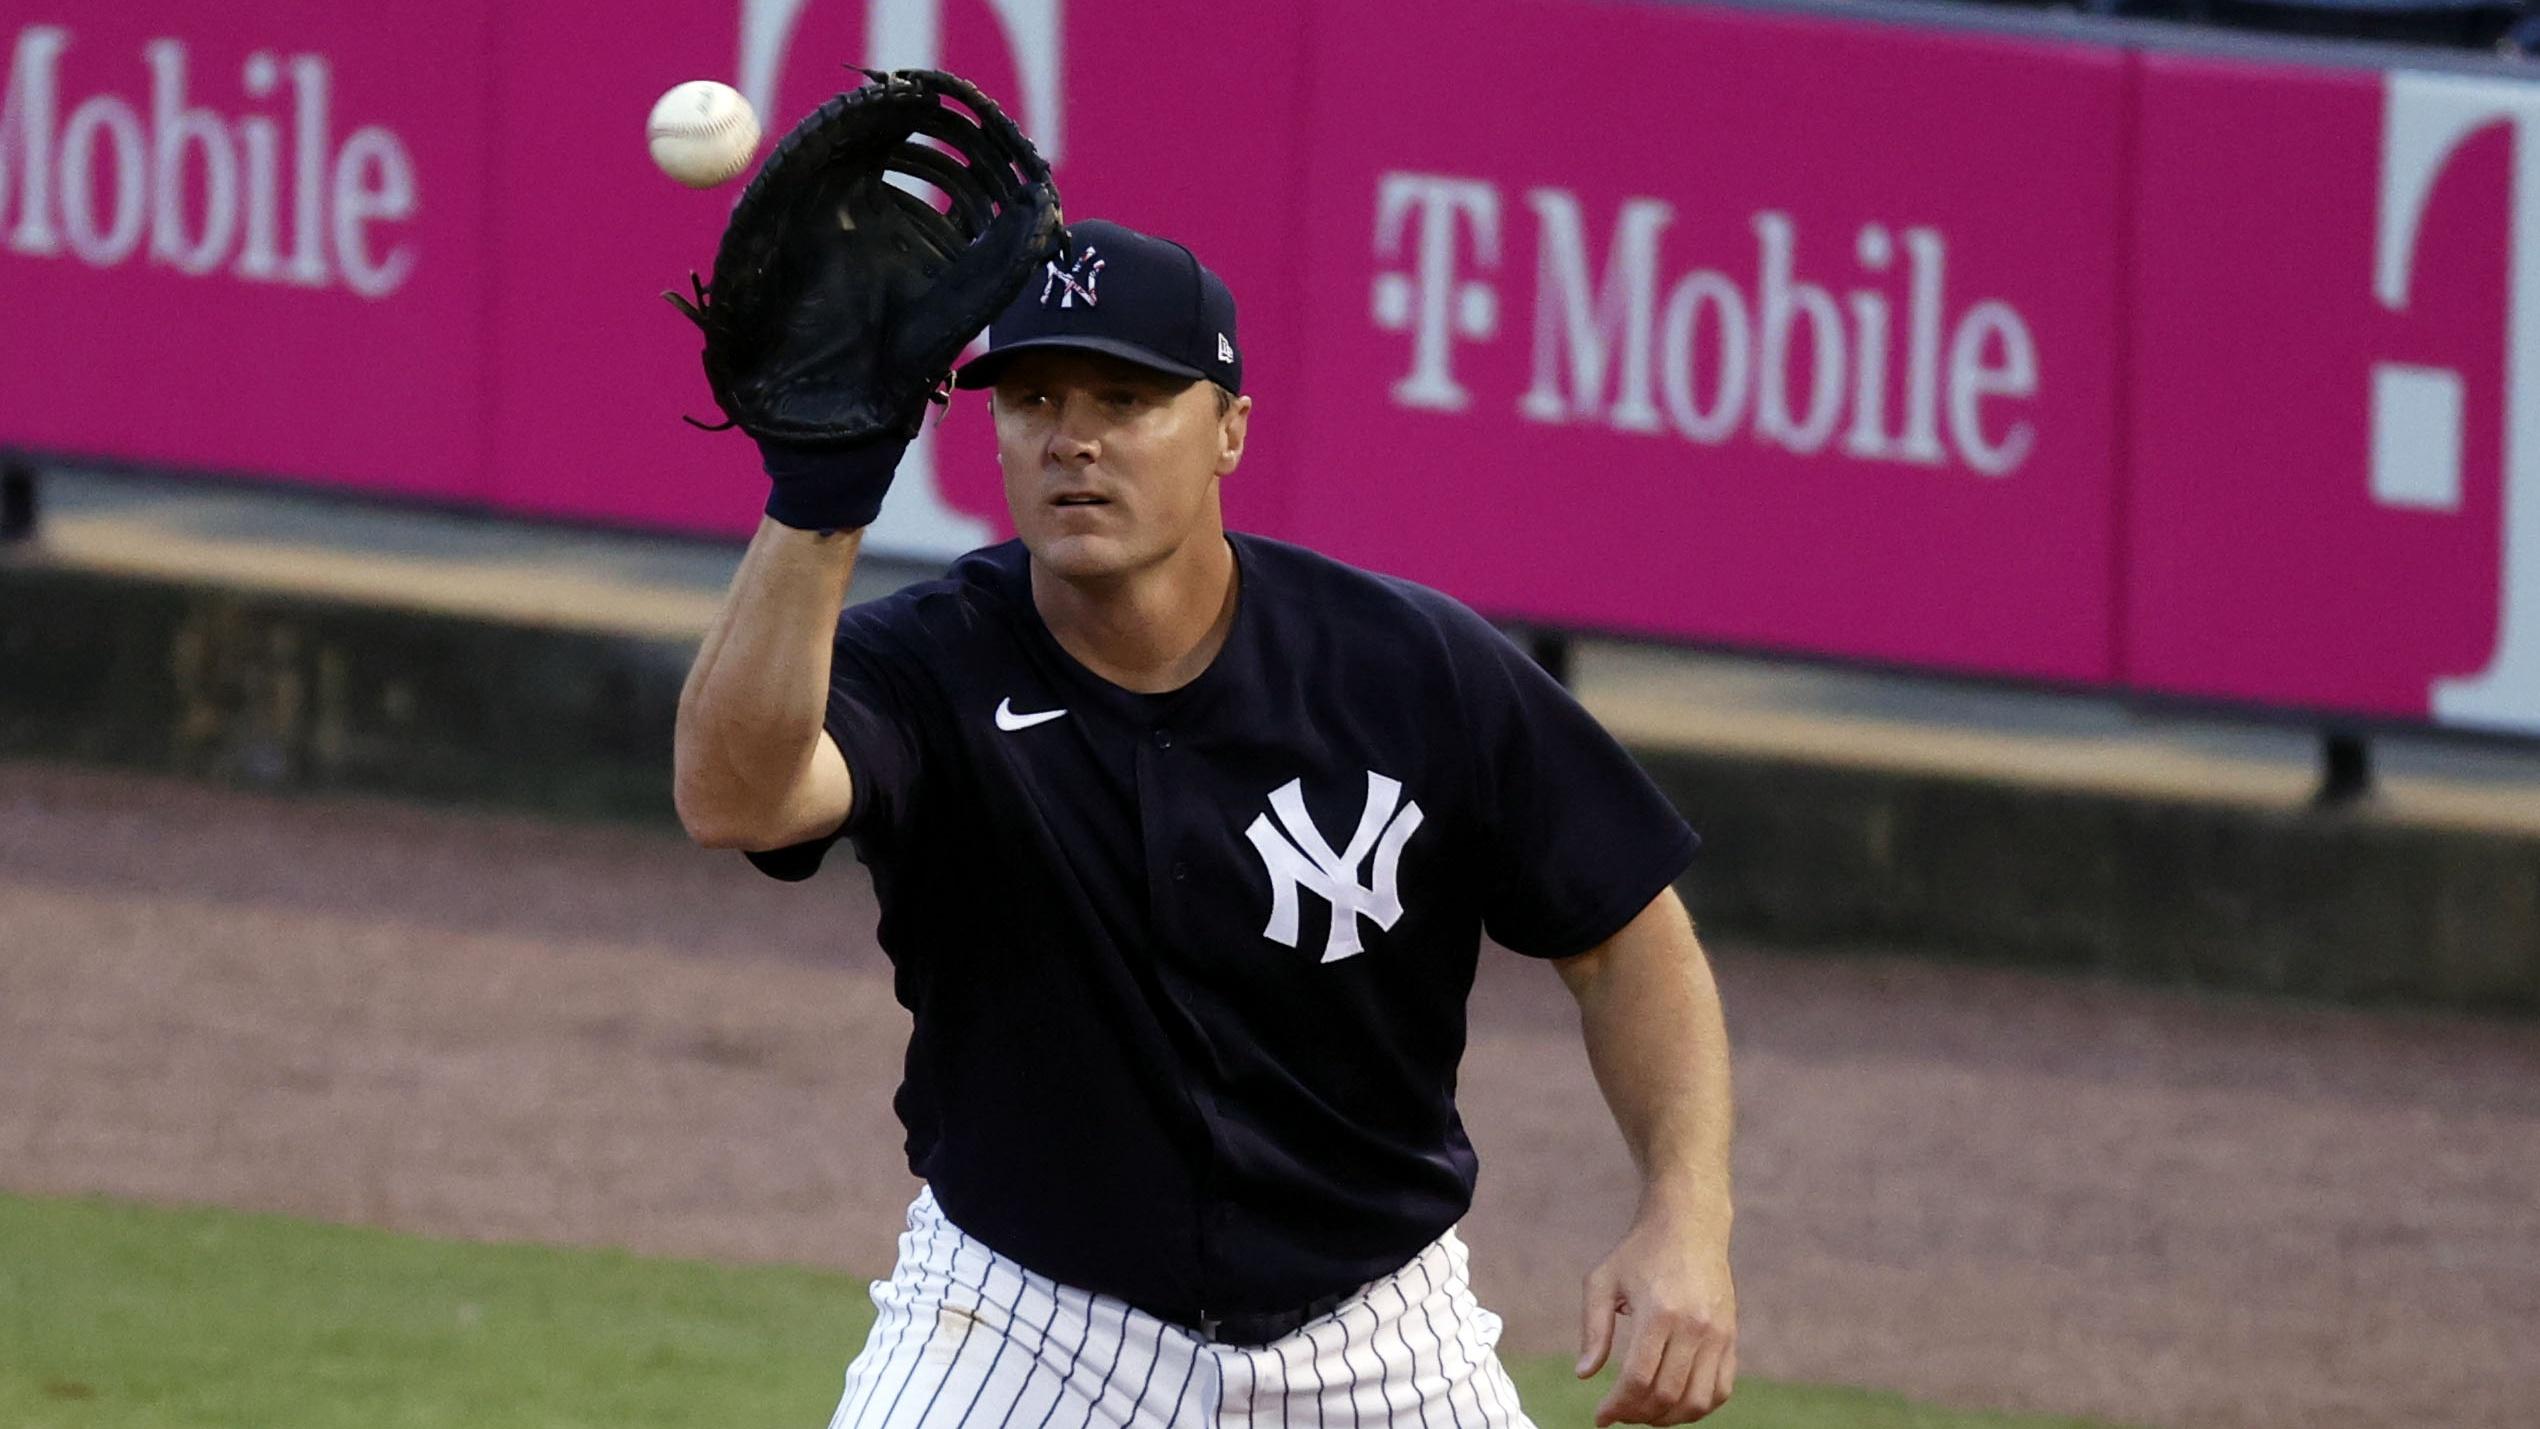 Mar 22, 2021; Tampa, Florida, USA; New York Yankees first baseman Jay Bruce (30) catches the ball for an out against the Philadelphia Phillies at George M. Steinbrenner Field. Mandatory Credit: Kim Klement-USA TODAY Sports / © Kim Klement-USA TODAY Sports